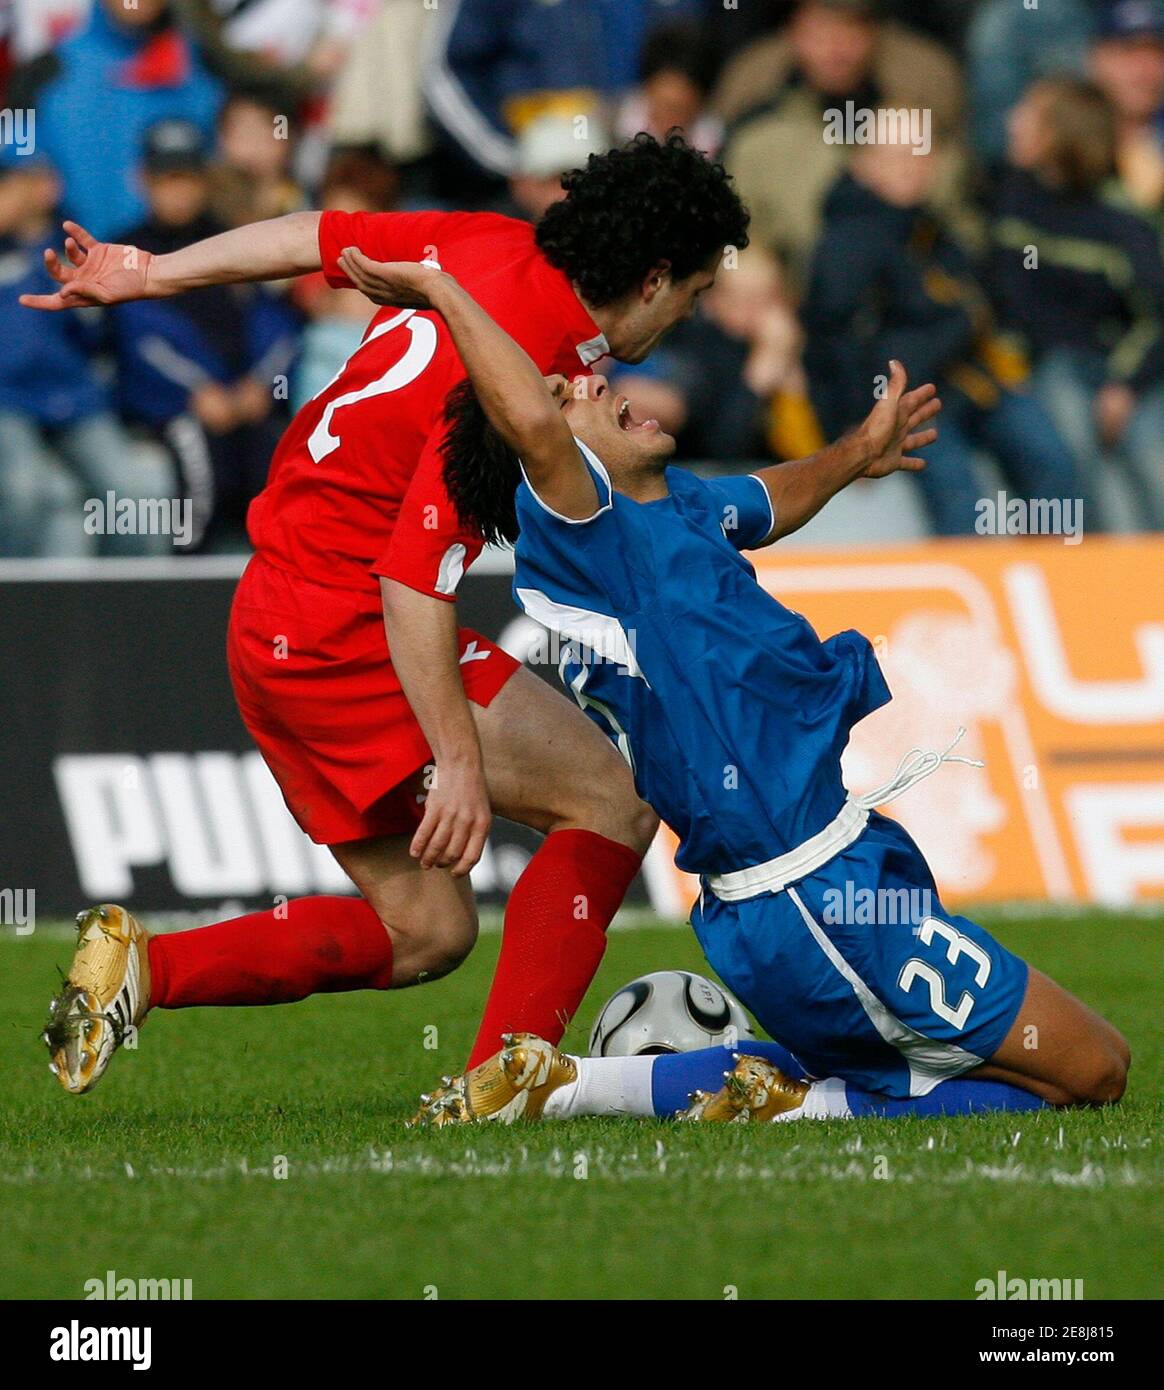 Paraguay's Nelson Cuevas (R) is fouled by Georgia's Jaba Kankava during their friendly soccer match in Dornbirn, Austria May 31, 2006.  WORLD CUP 2006 PREVIEW    REUTERS/Miro Kuzmanovic Stock Photo